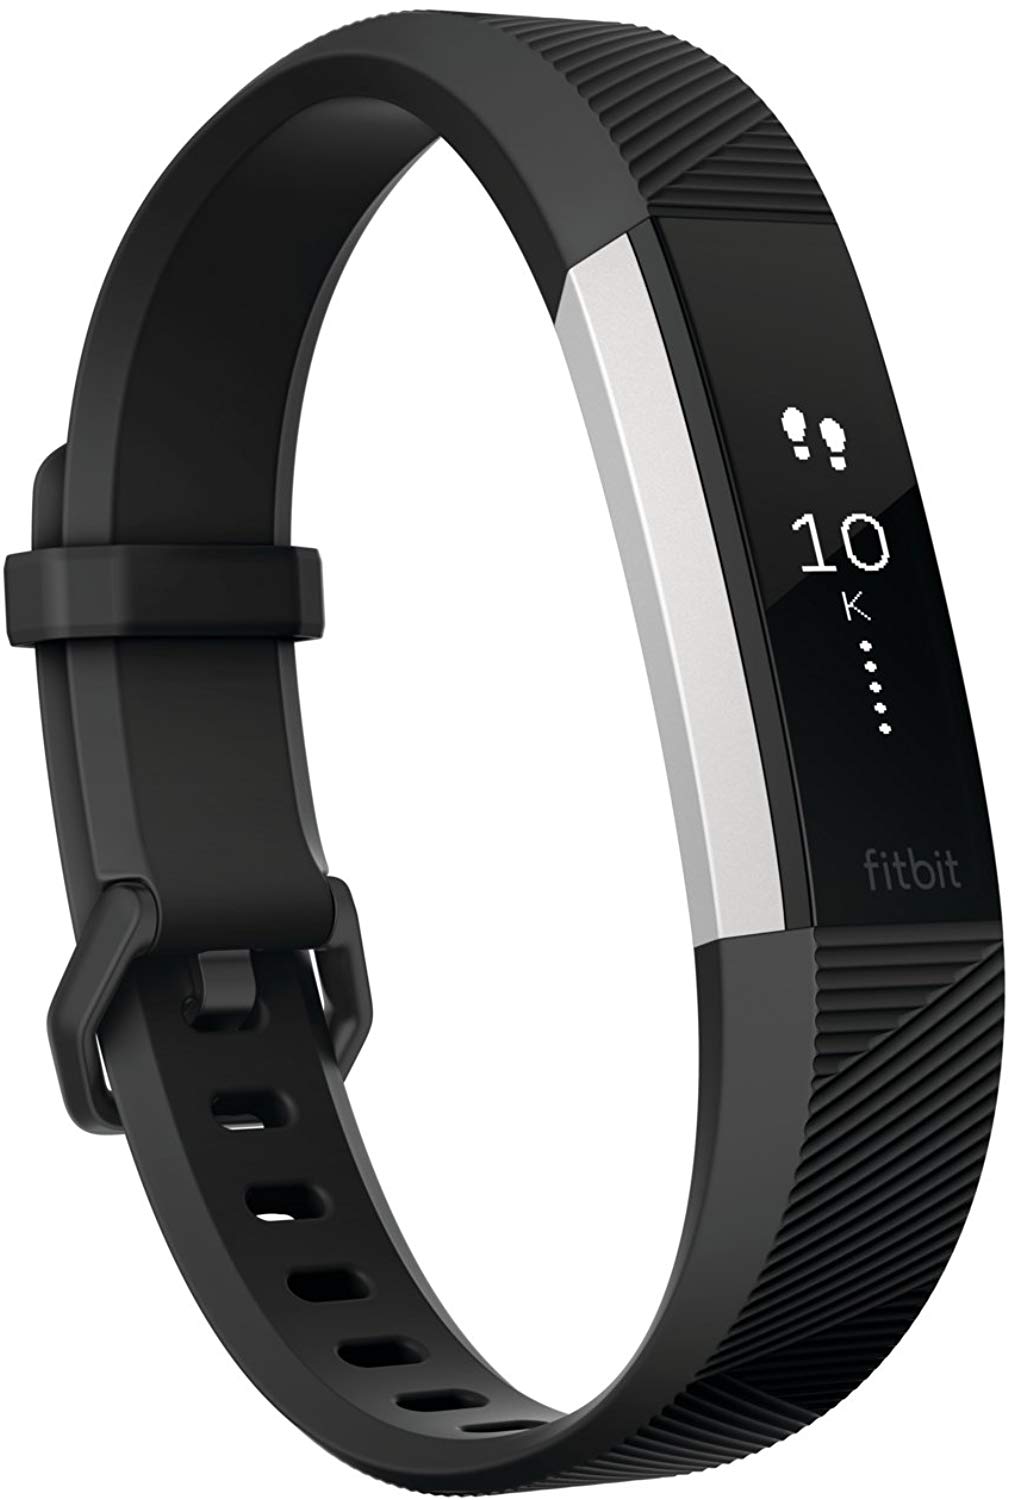 Charging Fitbit Alta Hr First Time : Fitbit Alta In-Depth Review | DC ...